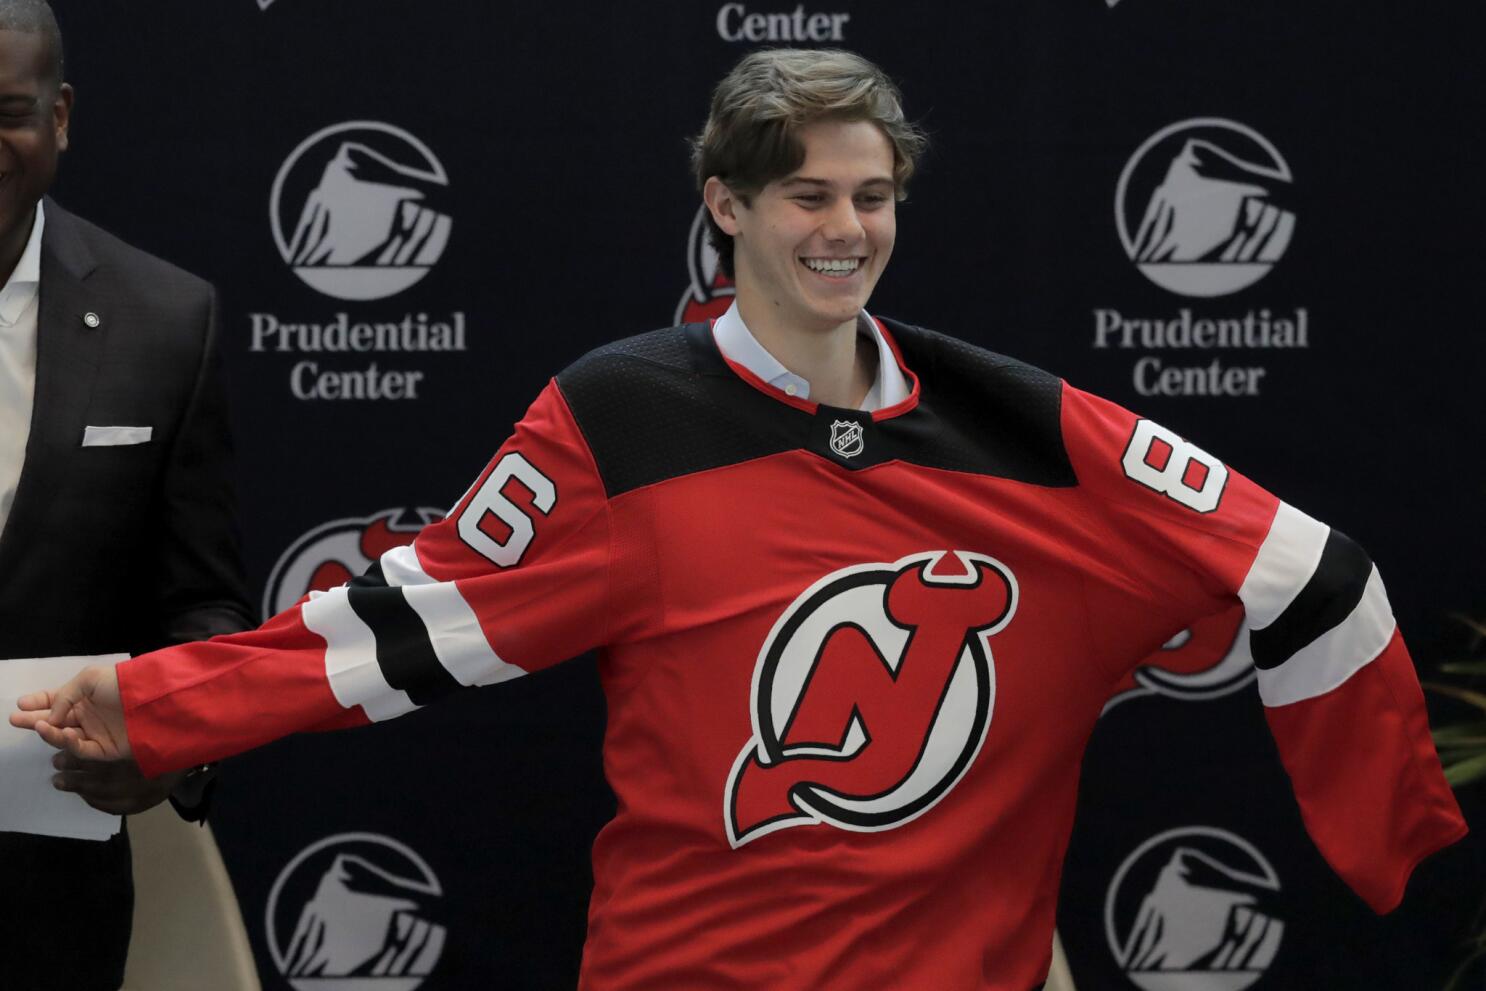 New Jersey Devils: There's Nothing To Worry About Jack Hughes